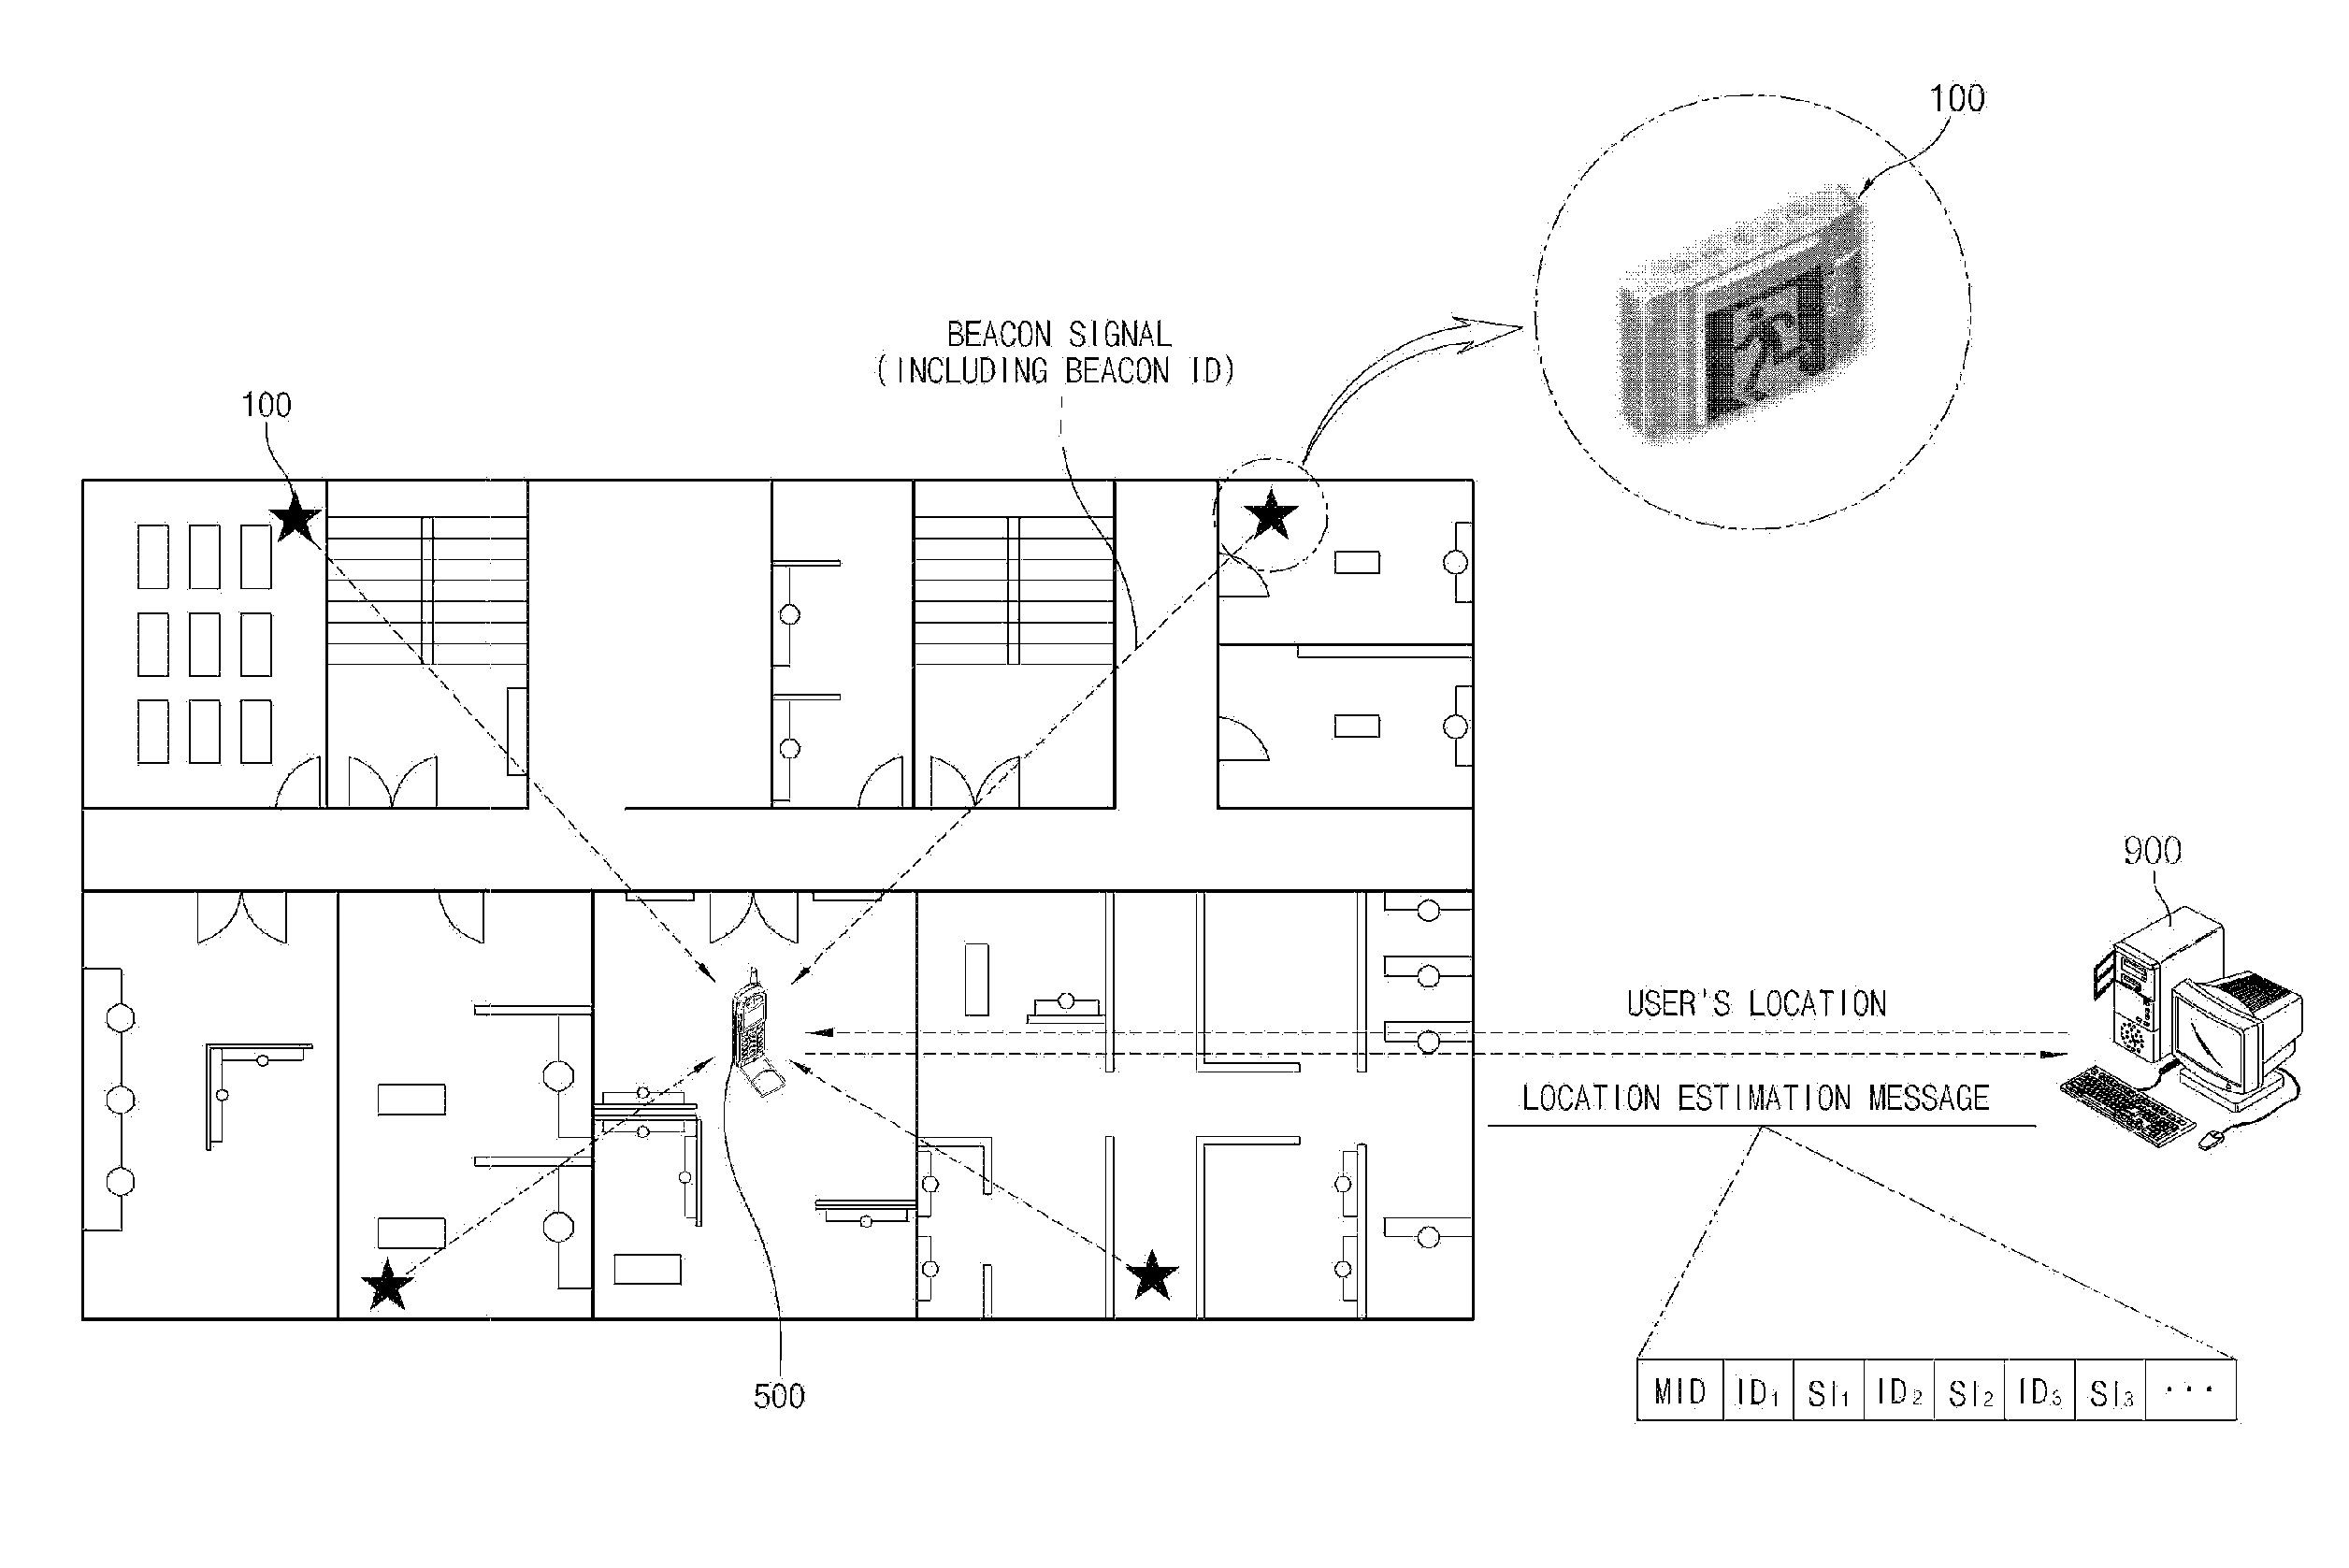 Emergency exit sign having beacon modulefor indoor positioning, and indoorpositioning system using the same